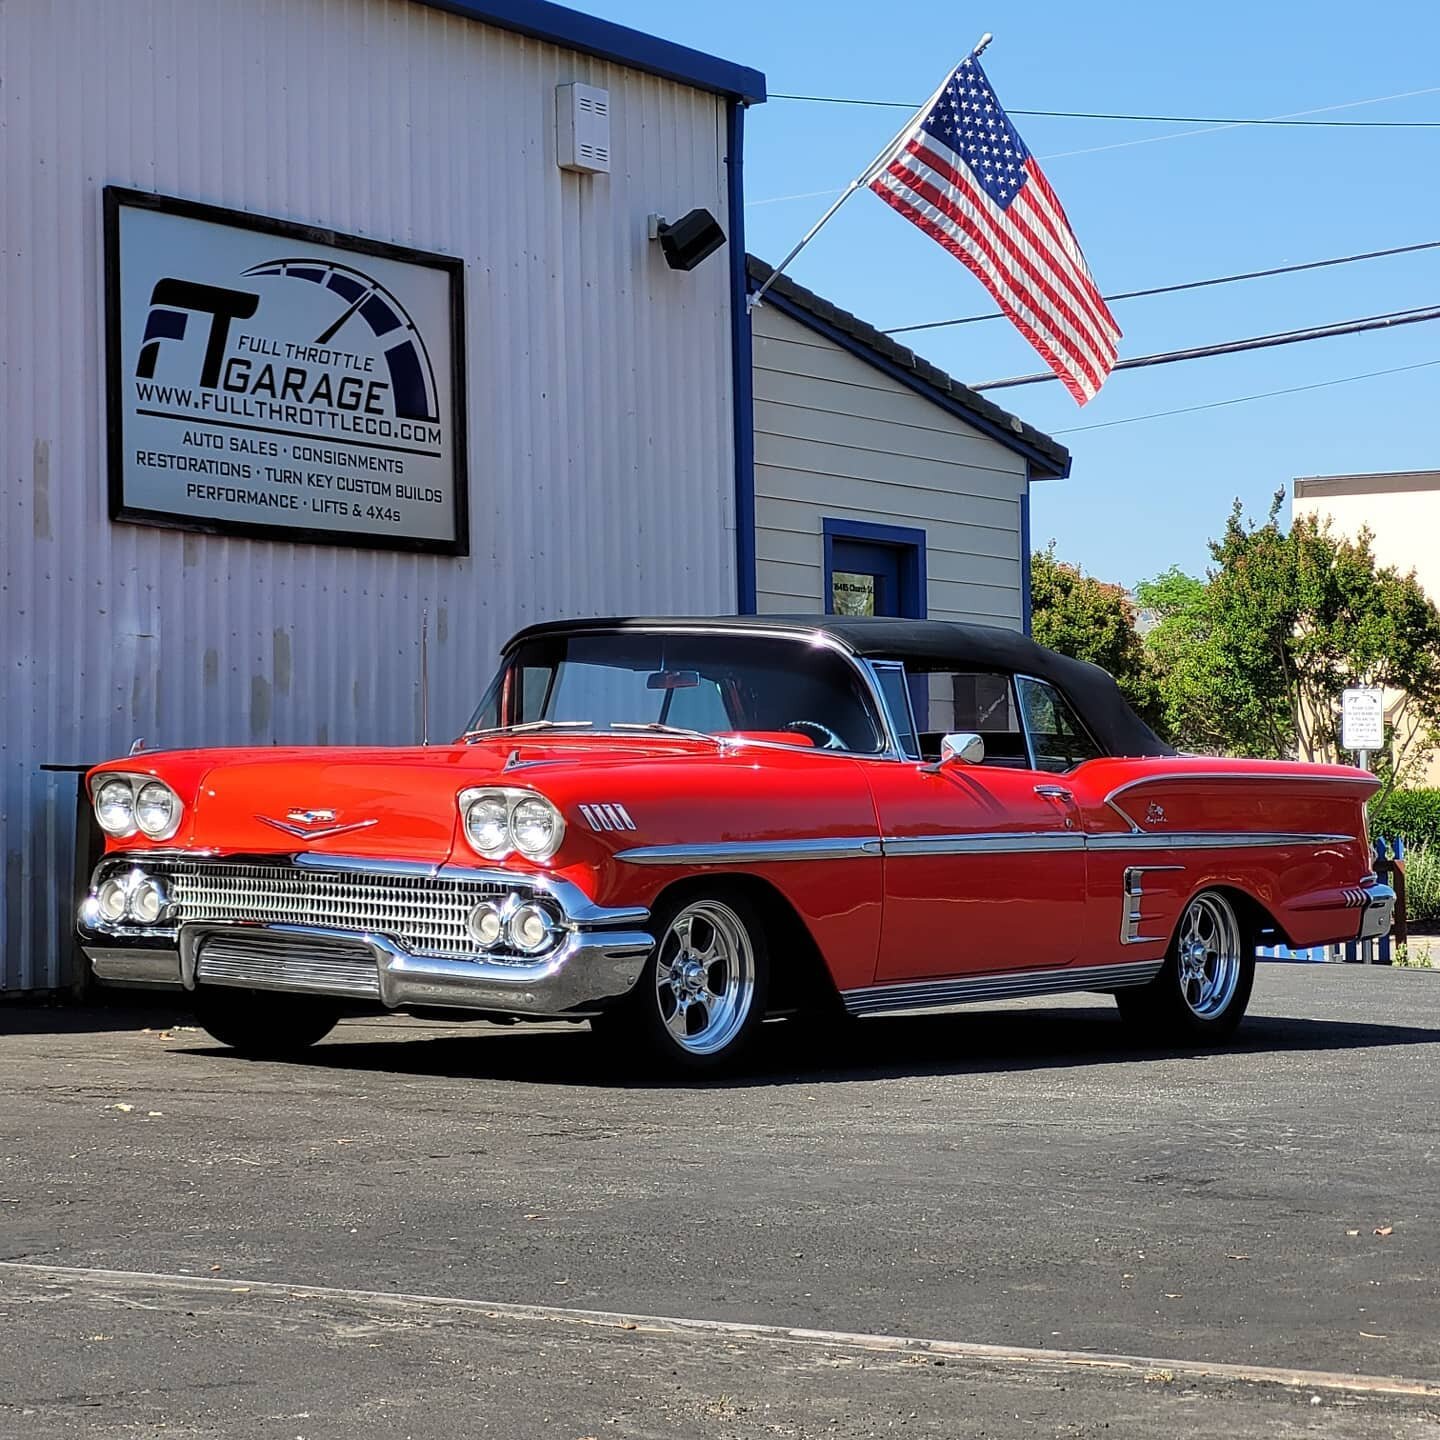 Check out this immaculate 1958 Cevrolet Impala with a 348 Super Turbo-Thrust big block! The client was driving her down to us from San Jose when the mechanical fuel pump gave out on an overpass! We came to the rescue and were able to wire in an elect